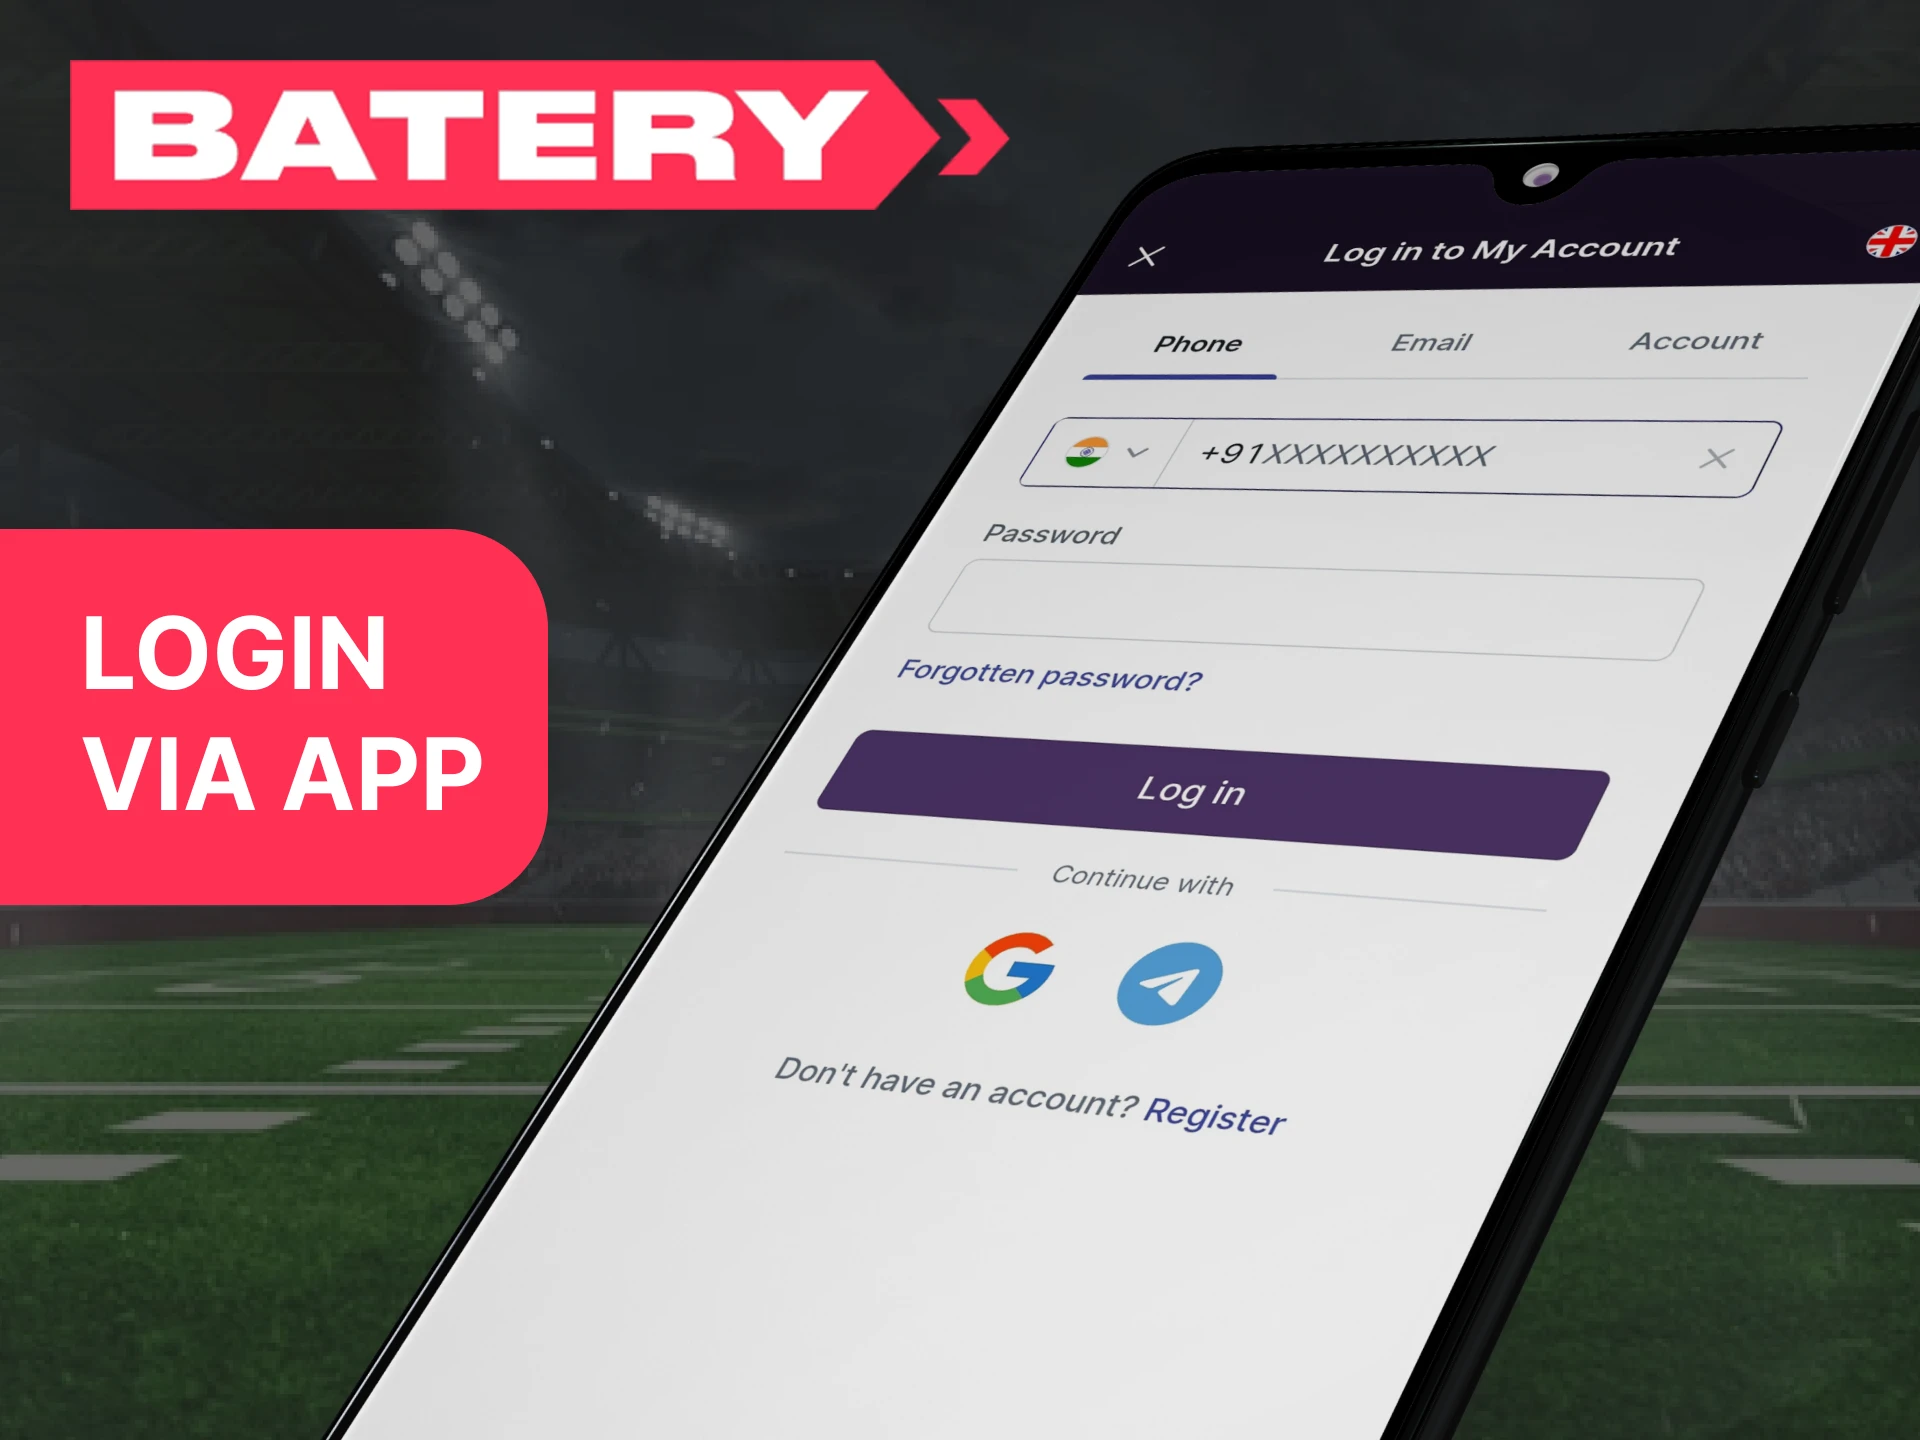 You can log into your existing Batery account directly from the mobile app.